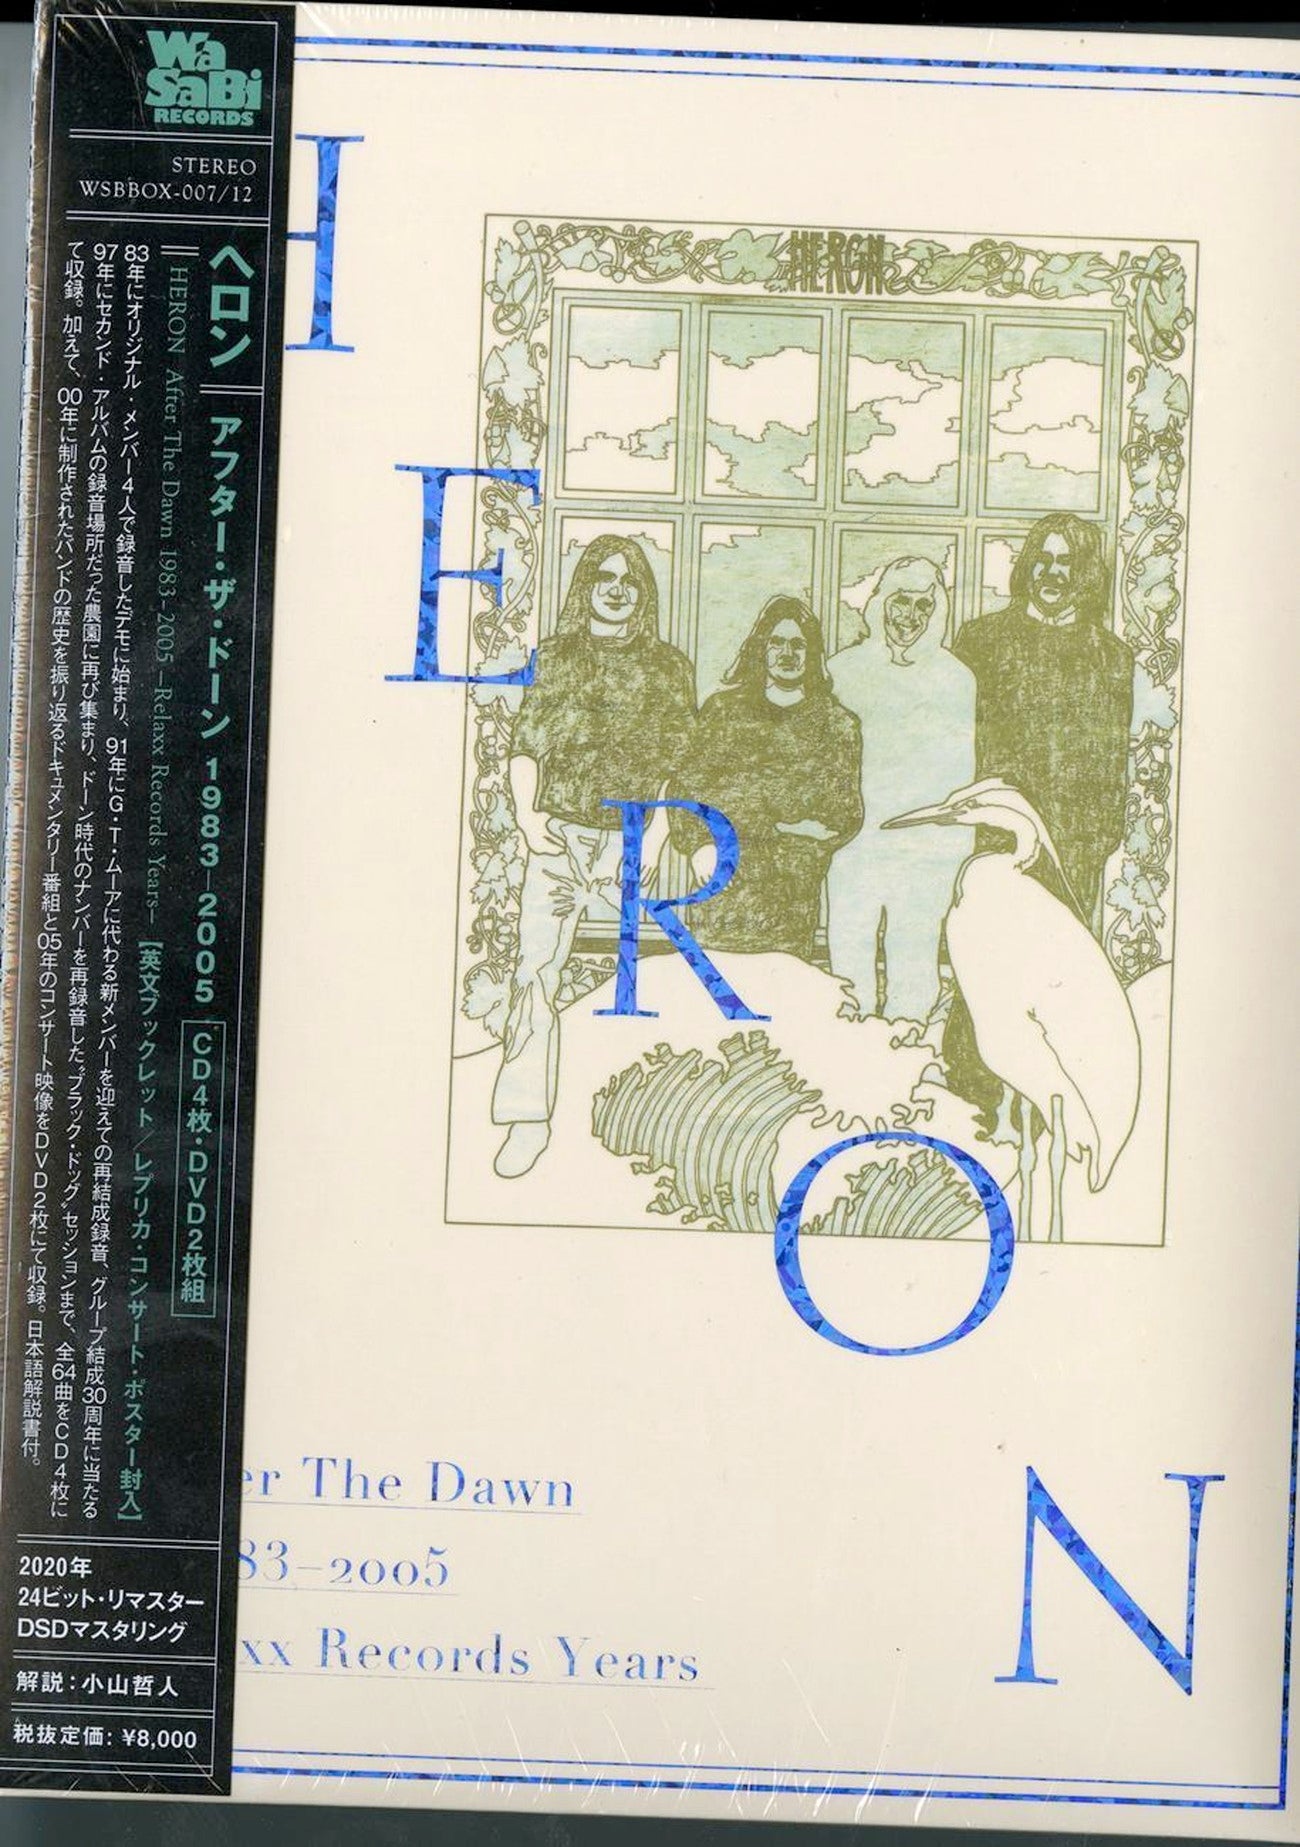 Heron - After The Dawn 1983-2005 -Relaxx Records Years- - Japan  4 CD+2 DVD+Book